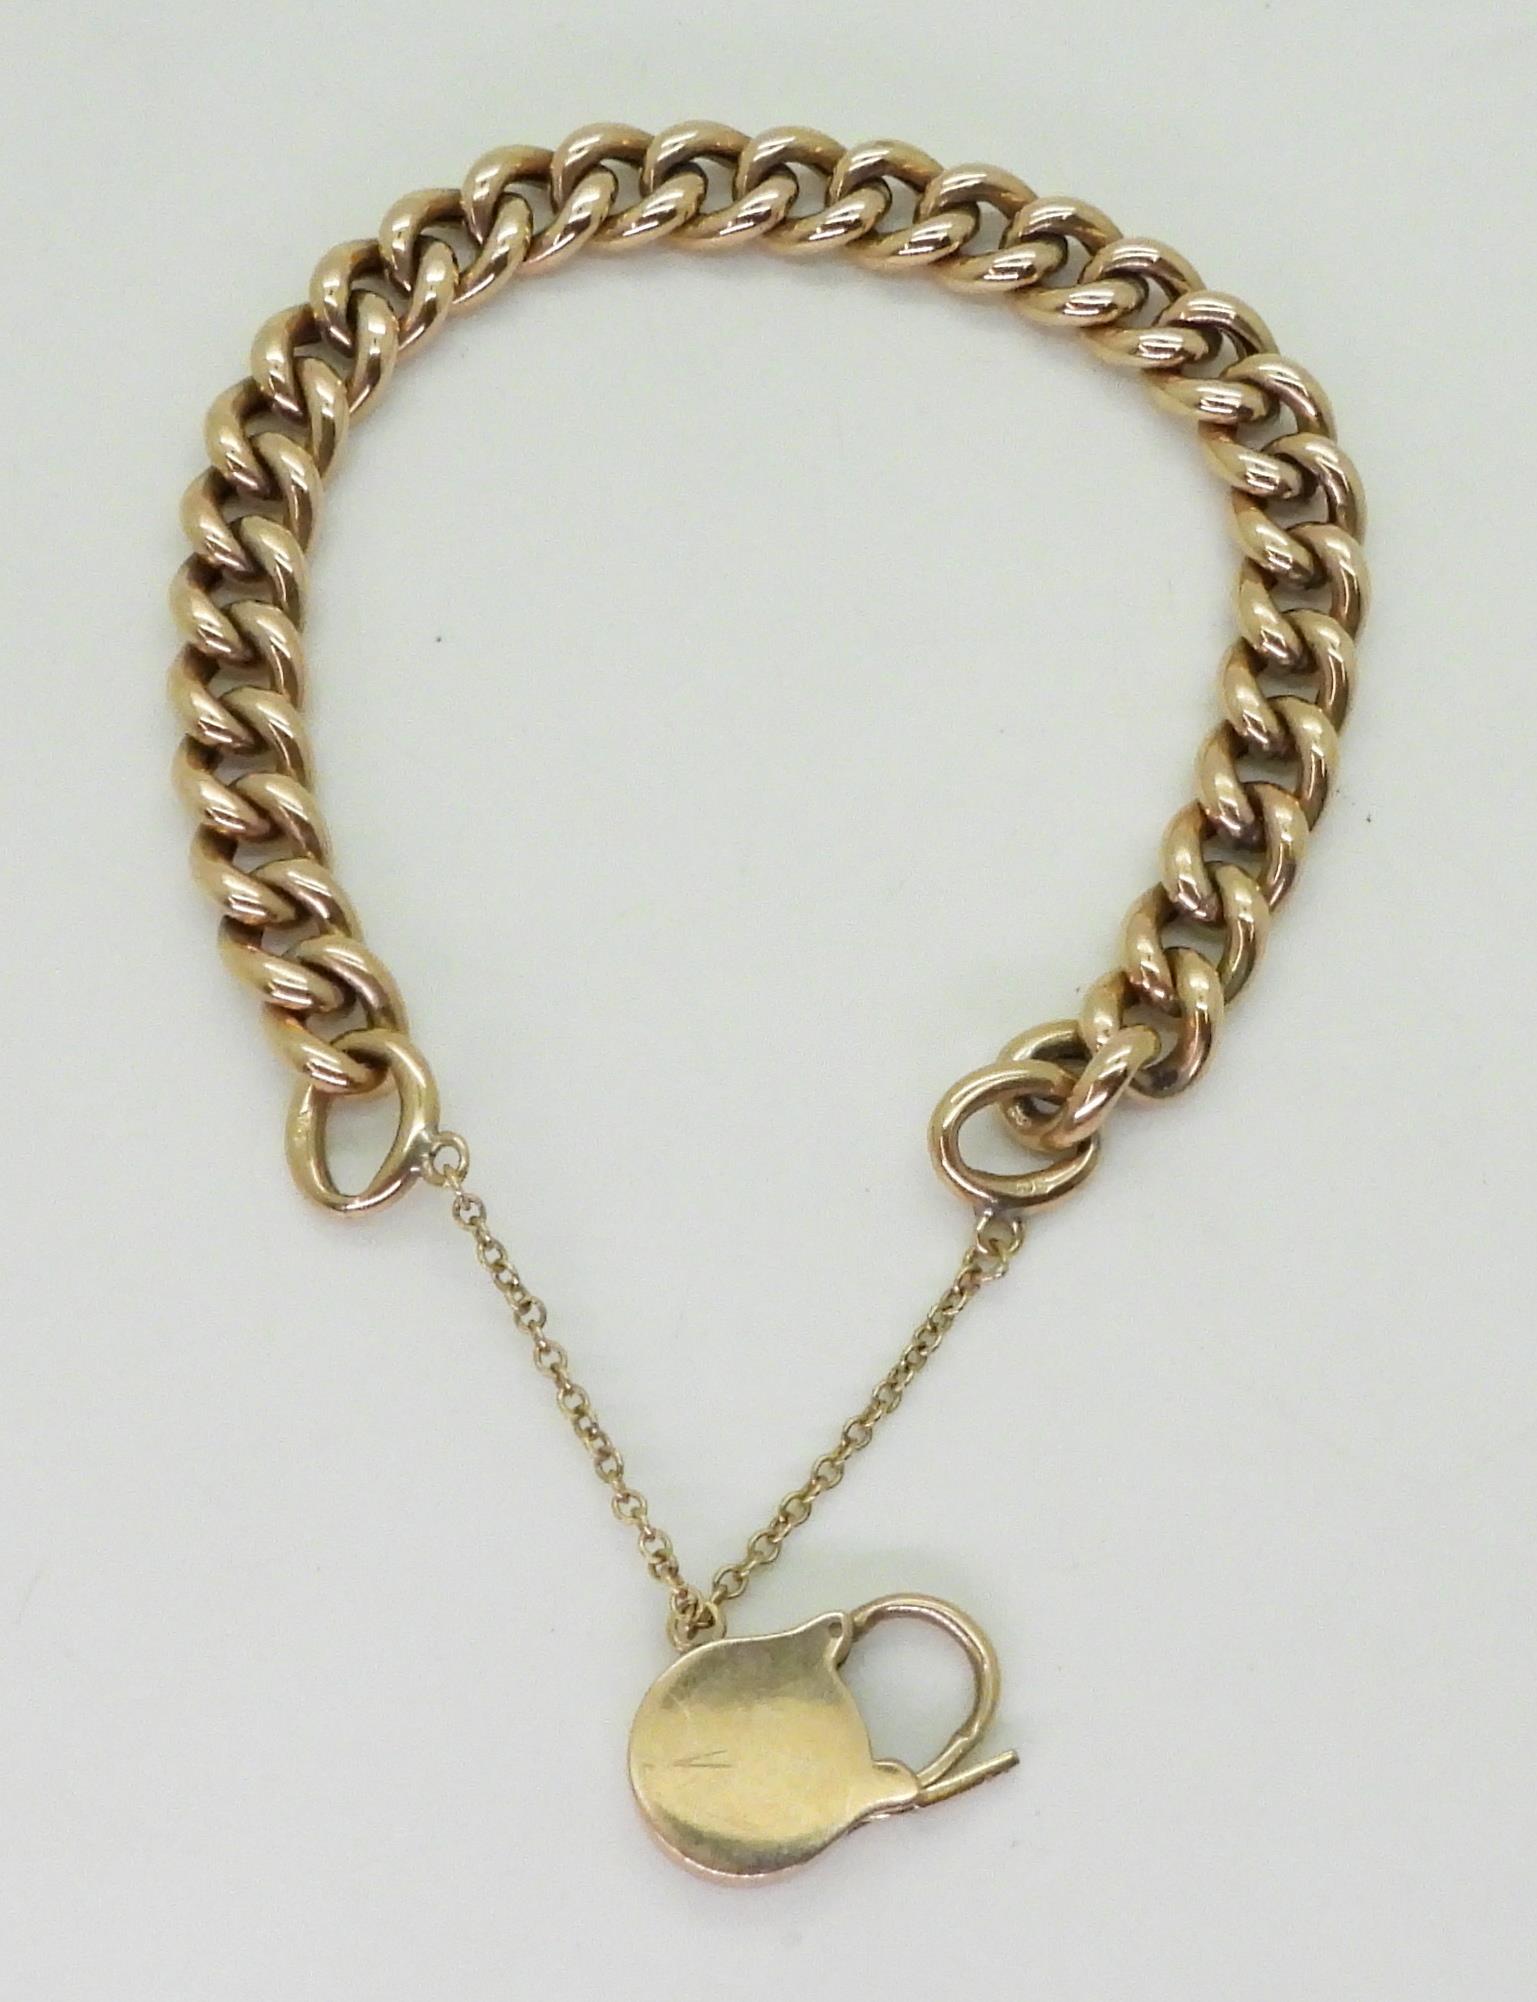 A 9ct gold curb link bracelet, with a padlock clasp, length 19.5cm, weight 19.6gms Condition - Image 3 of 3